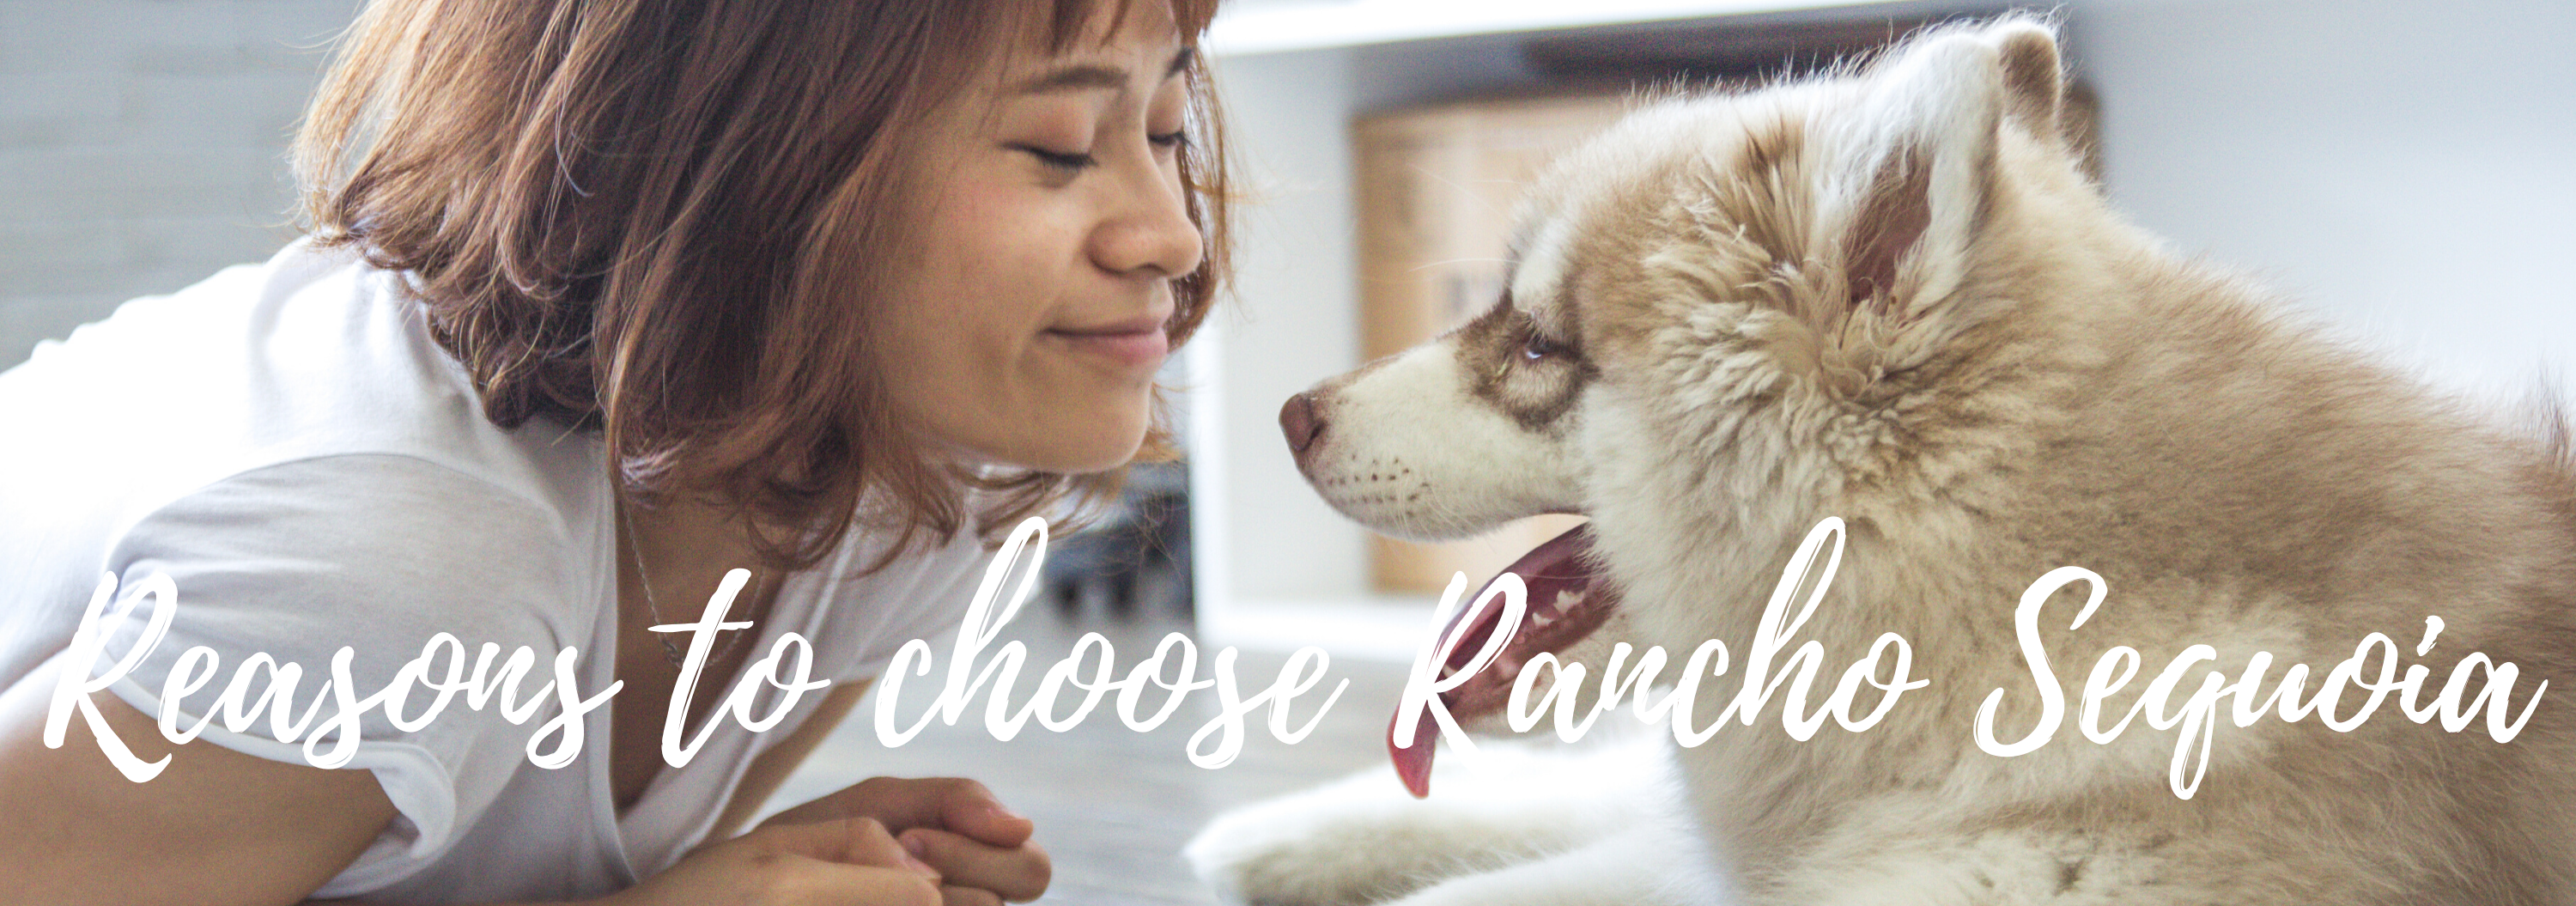 Why Choose Rancho Sequoia | Veterinarian in Simi Valley, CA | Rancho  Sequoia Veterinary Hospital